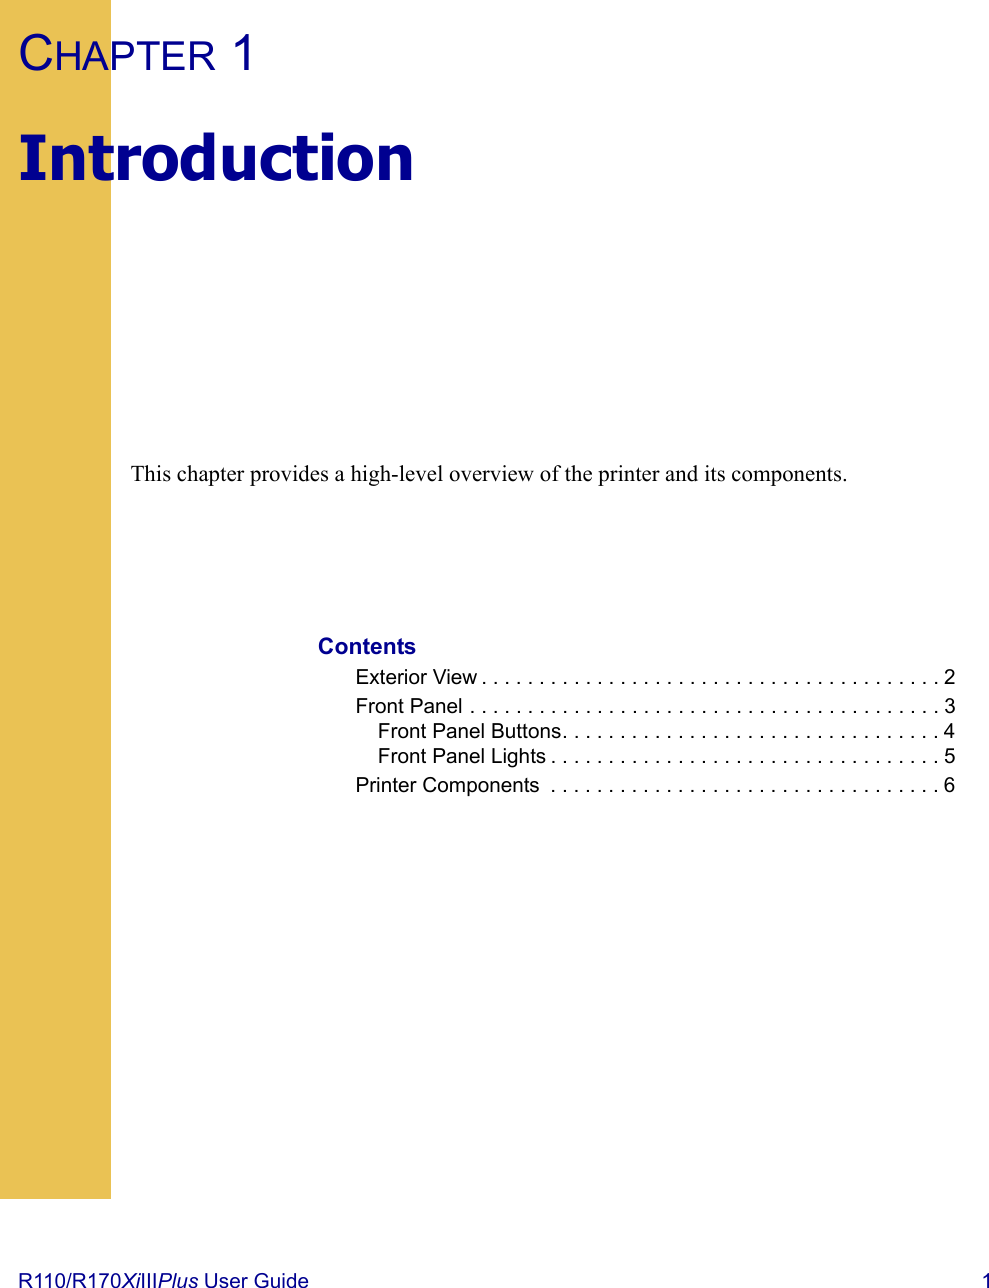 R110/R170XiIIIPlus User Guide  1CHAPTER 1IntroductionThis chapter provides a high-level overview of the printer and its components.ContentsExterior View . . . . . . . . . . . . . . . . . . . . . . . . . . . . . . . . . . . . . . . . 2Front Panel . . . . . . . . . . . . . . . . . . . . . . . . . . . . . . . . . . . . . . . . . 3Front Panel Buttons. . . . . . . . . . . . . . . . . . . . . . . . . . . . . . . . . 4Front Panel Lights . . . . . . . . . . . . . . . . . . . . . . . . . . . . . . . . . . 5Printer Components  . . . . . . . . . . . . . . . . . . . . . . . . . . . . . . . . . . 6 